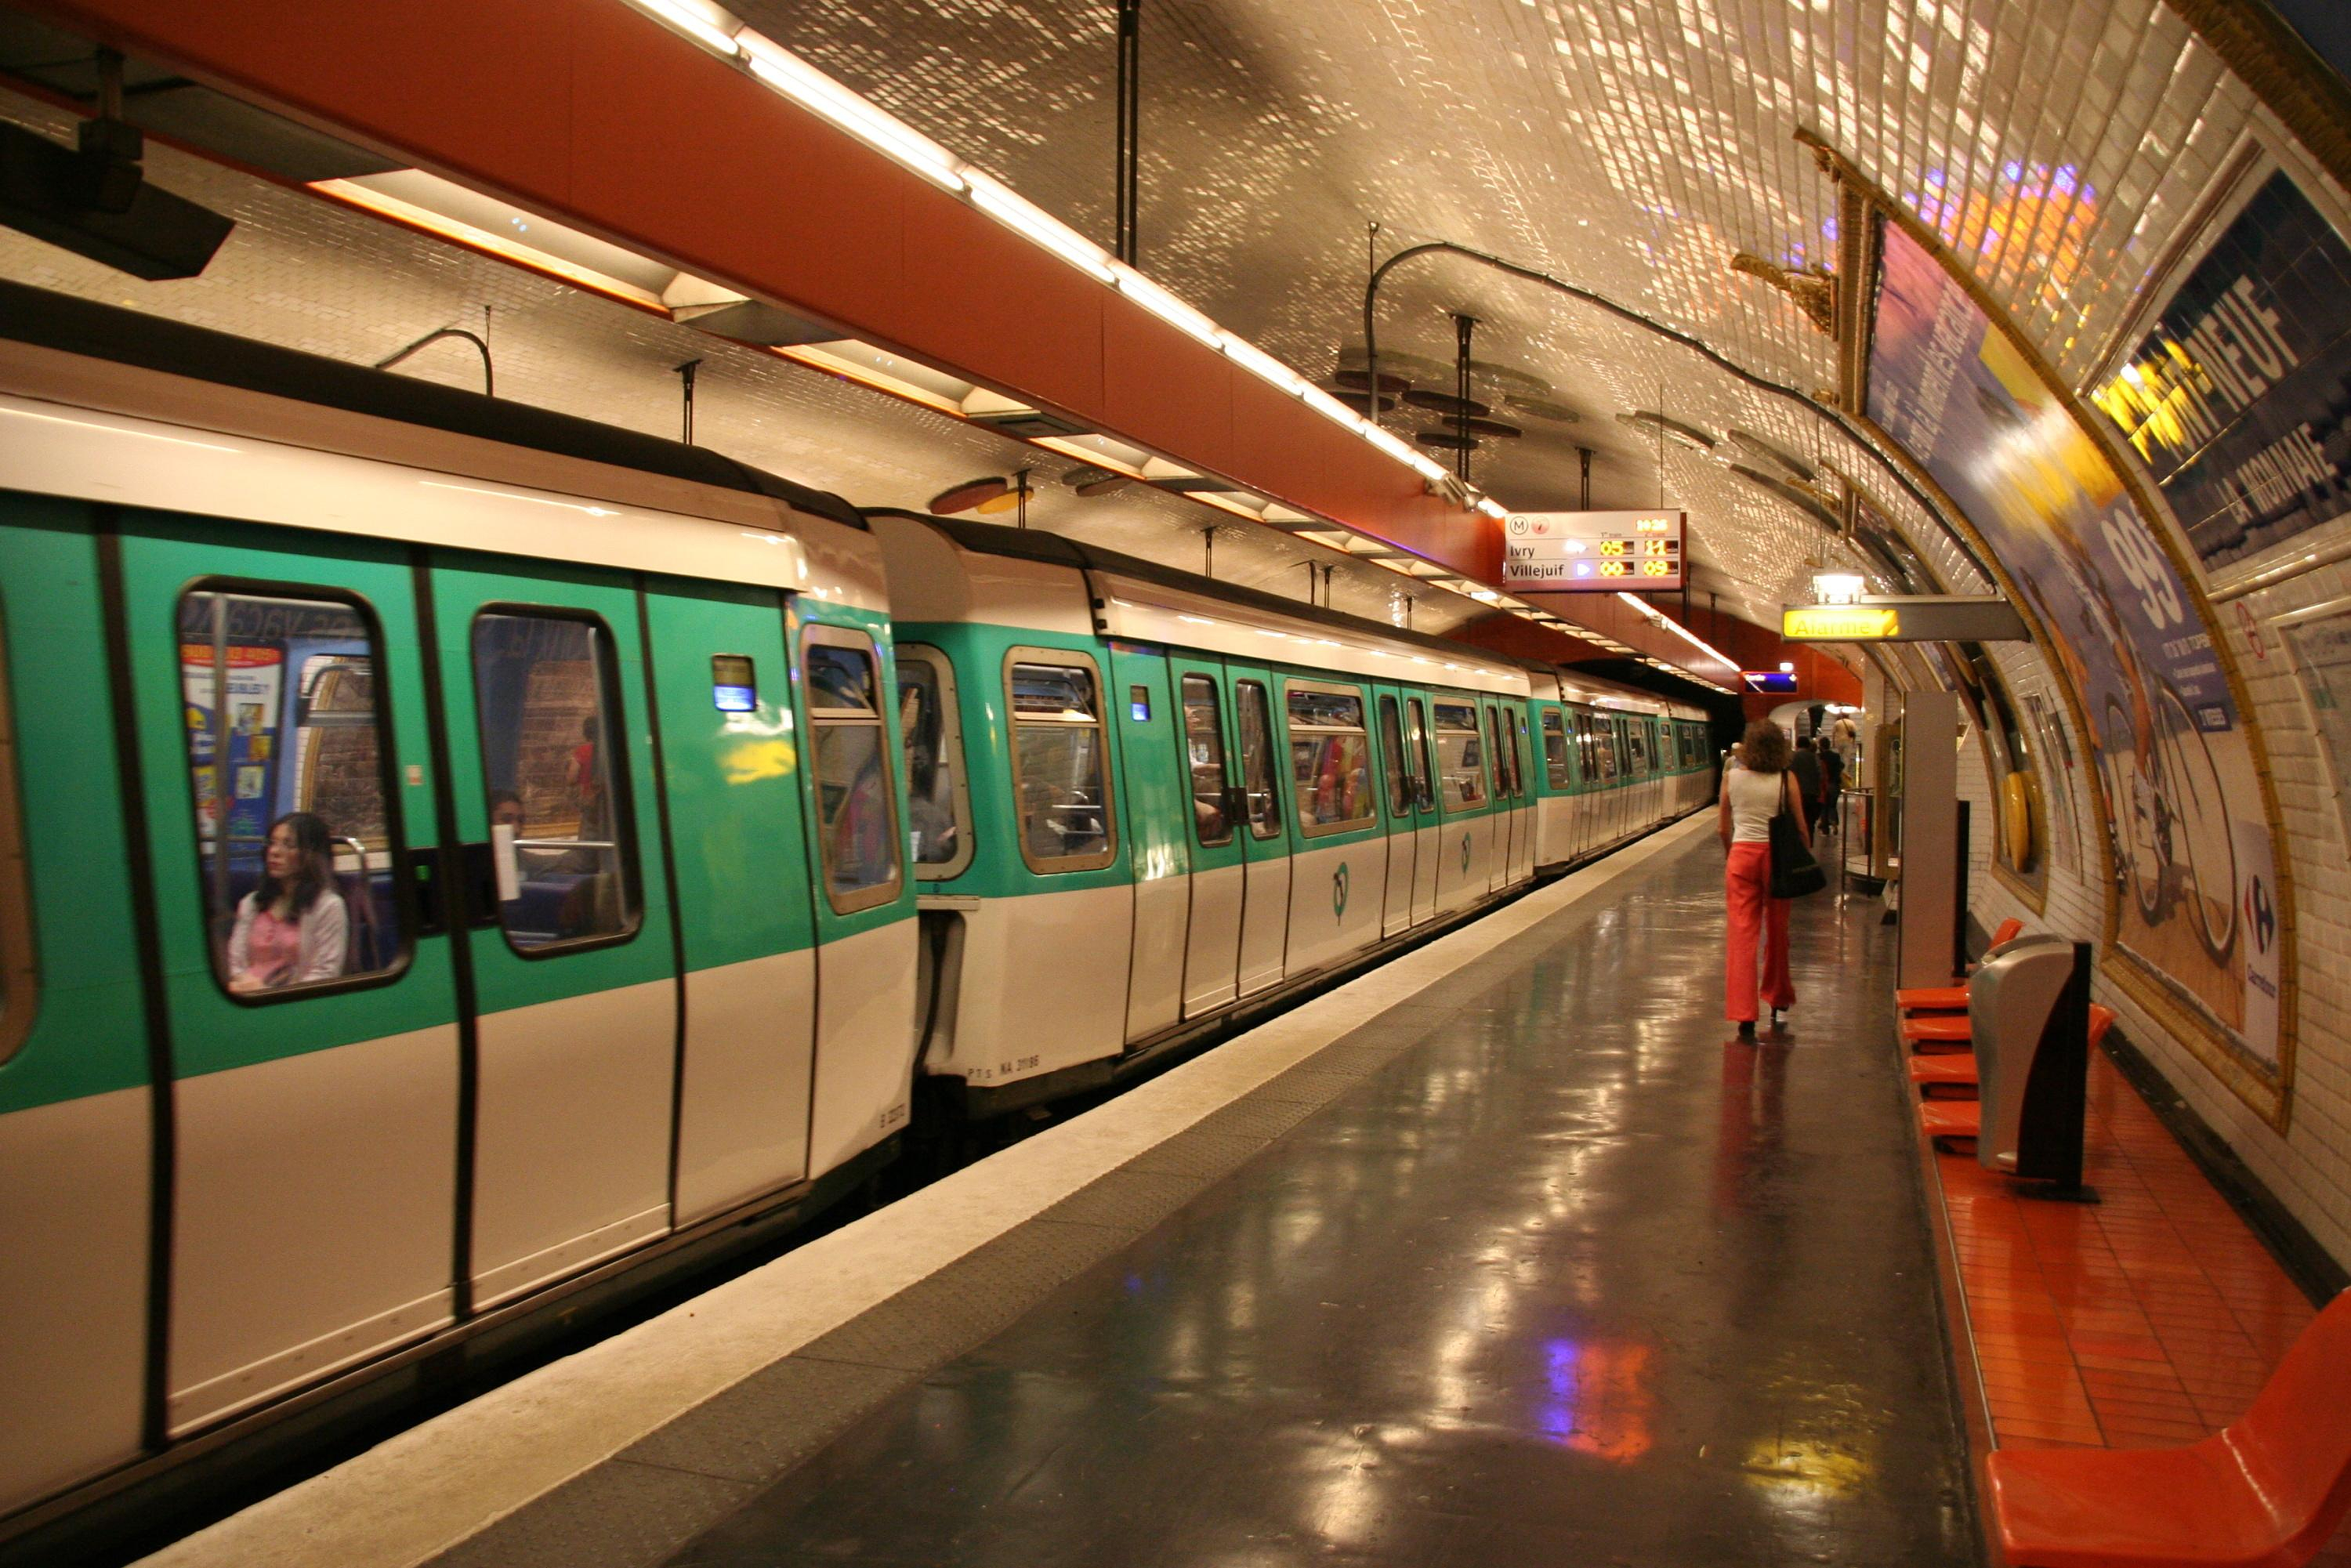 Find out which are the three most polluted Paris metro stations, according to an Airparif study